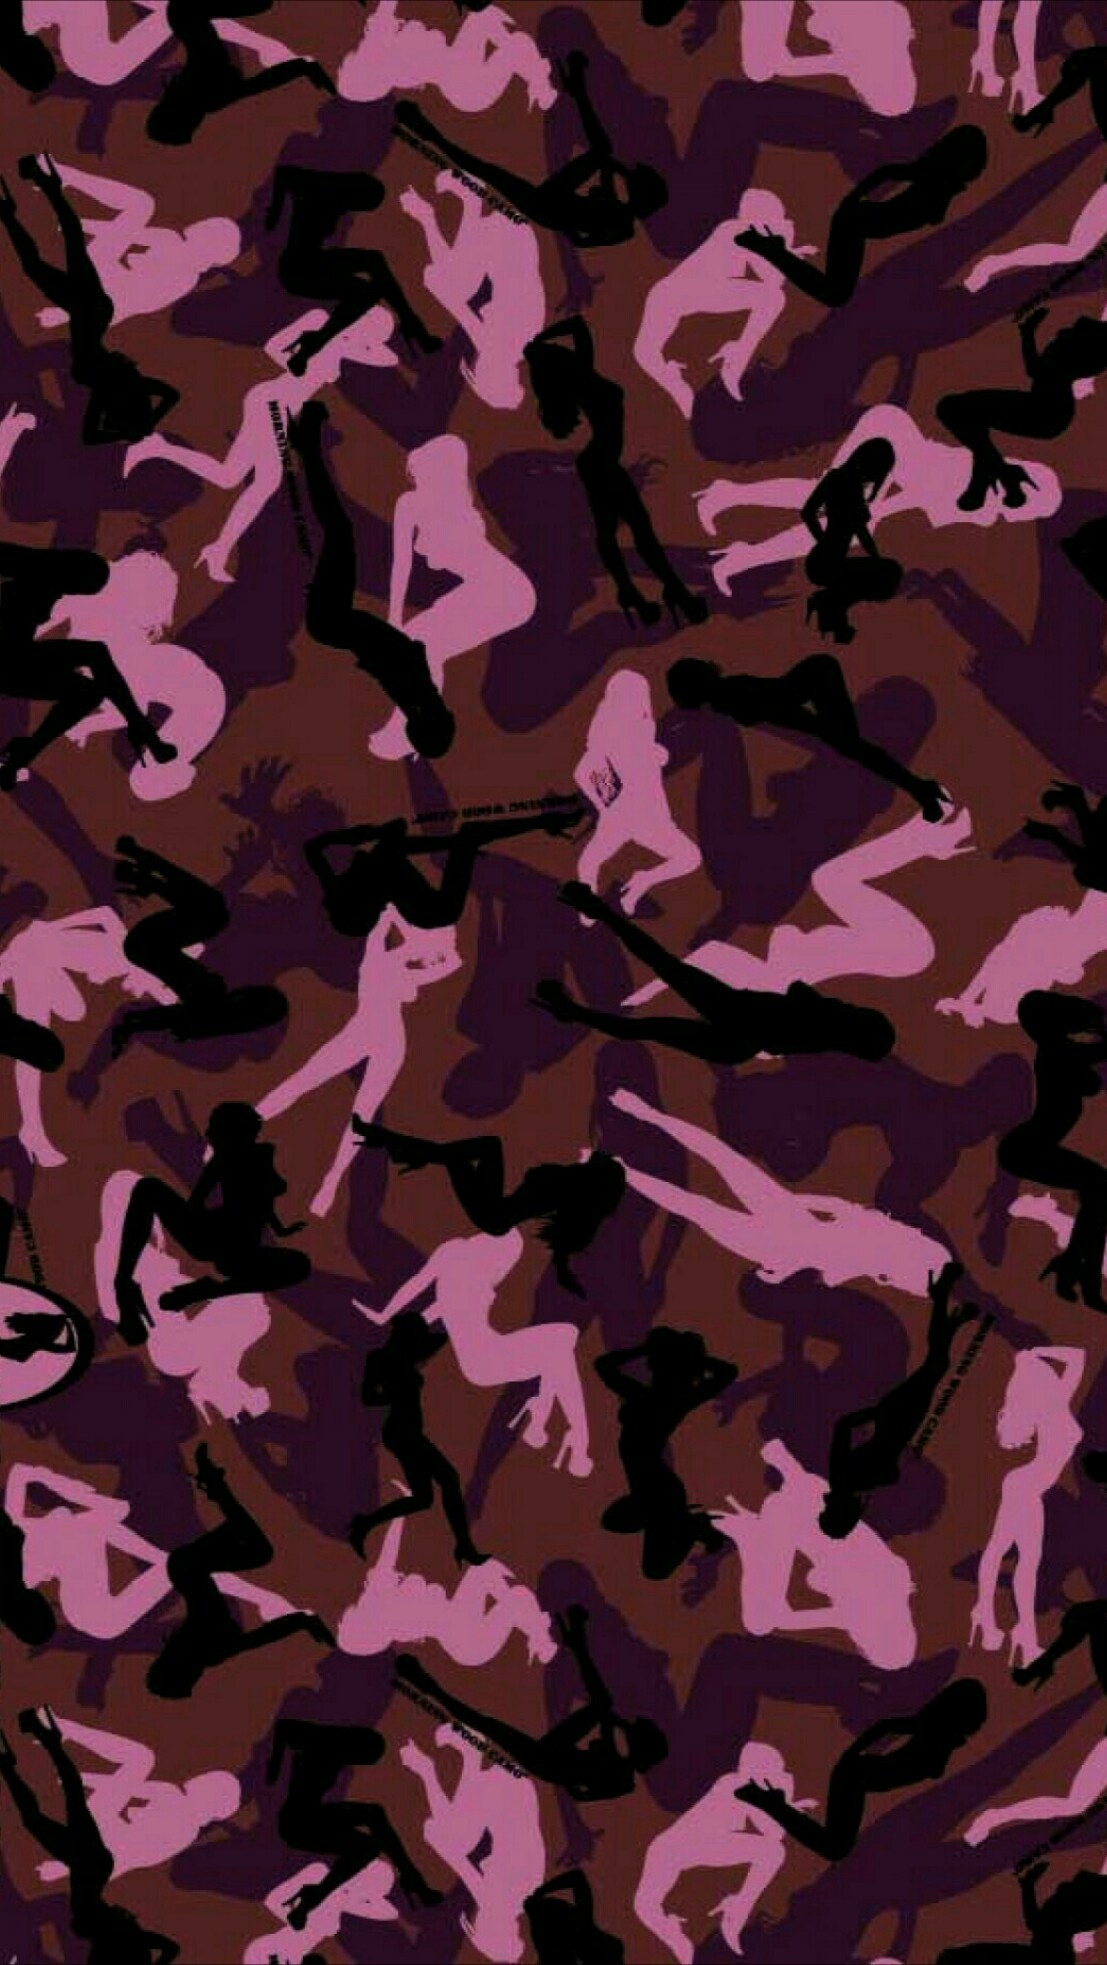 1107x1965 #sexy #camouflage #black #wallpaper #android #iphone